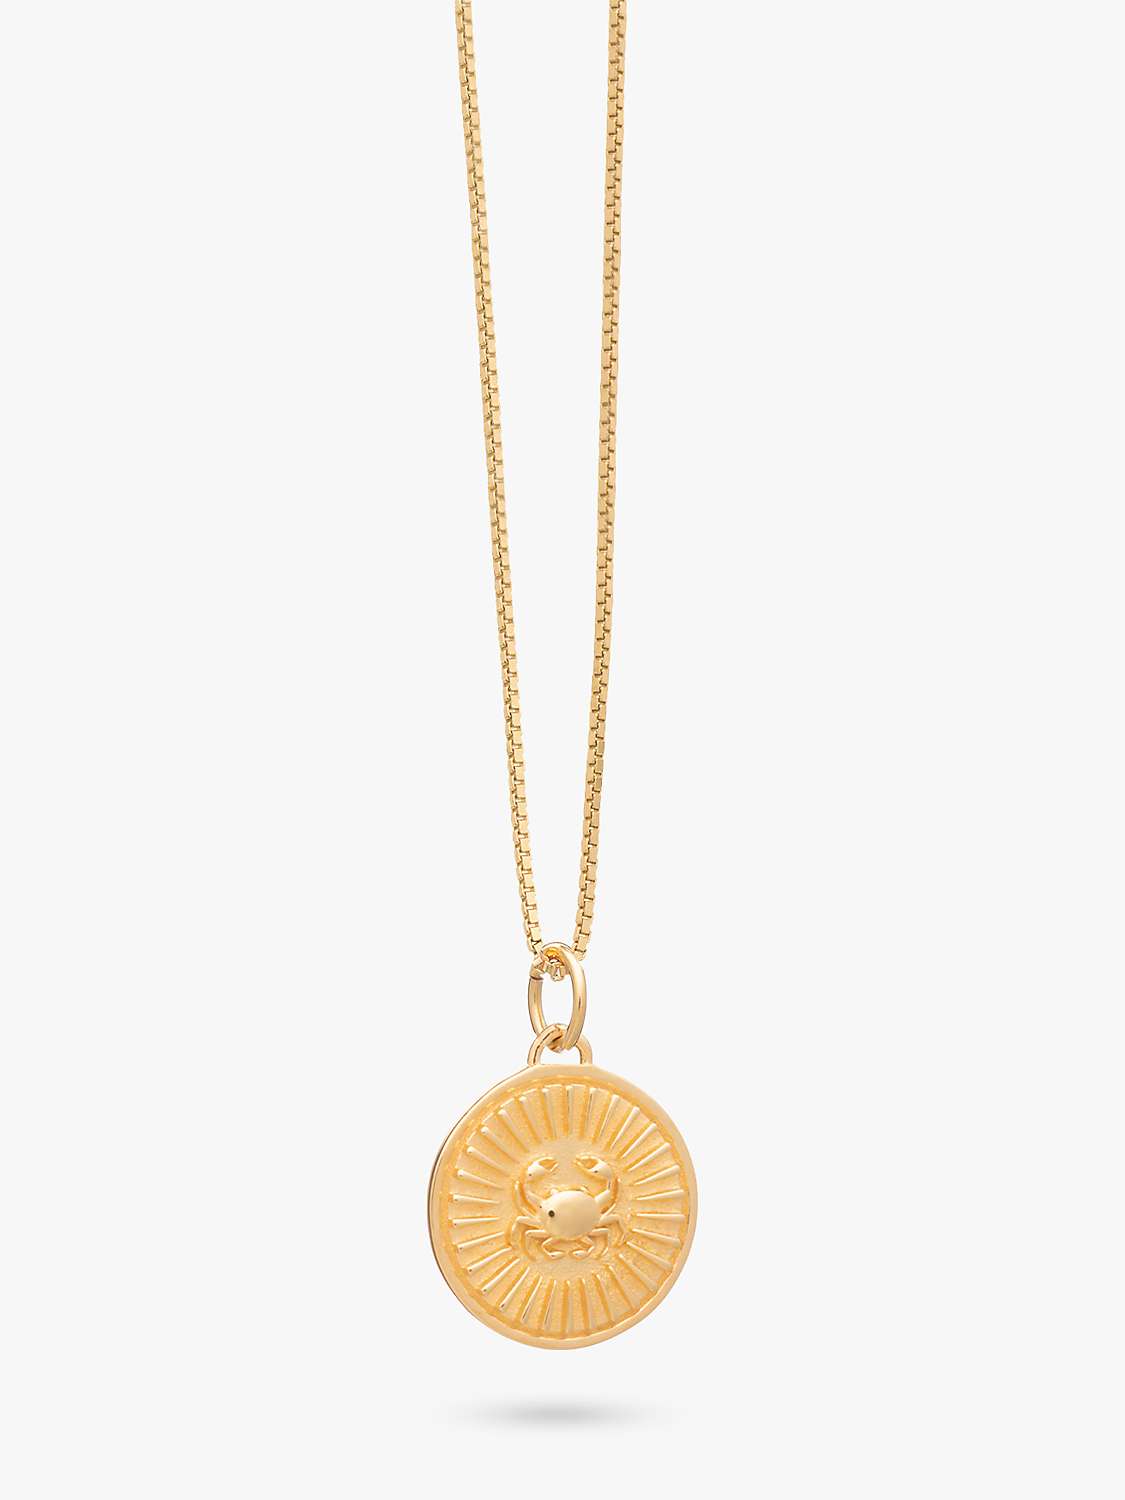 Buy Rachel Jackson London Personalised Zodiac Art Coin Necklace, Gold Online at johnlewis.com